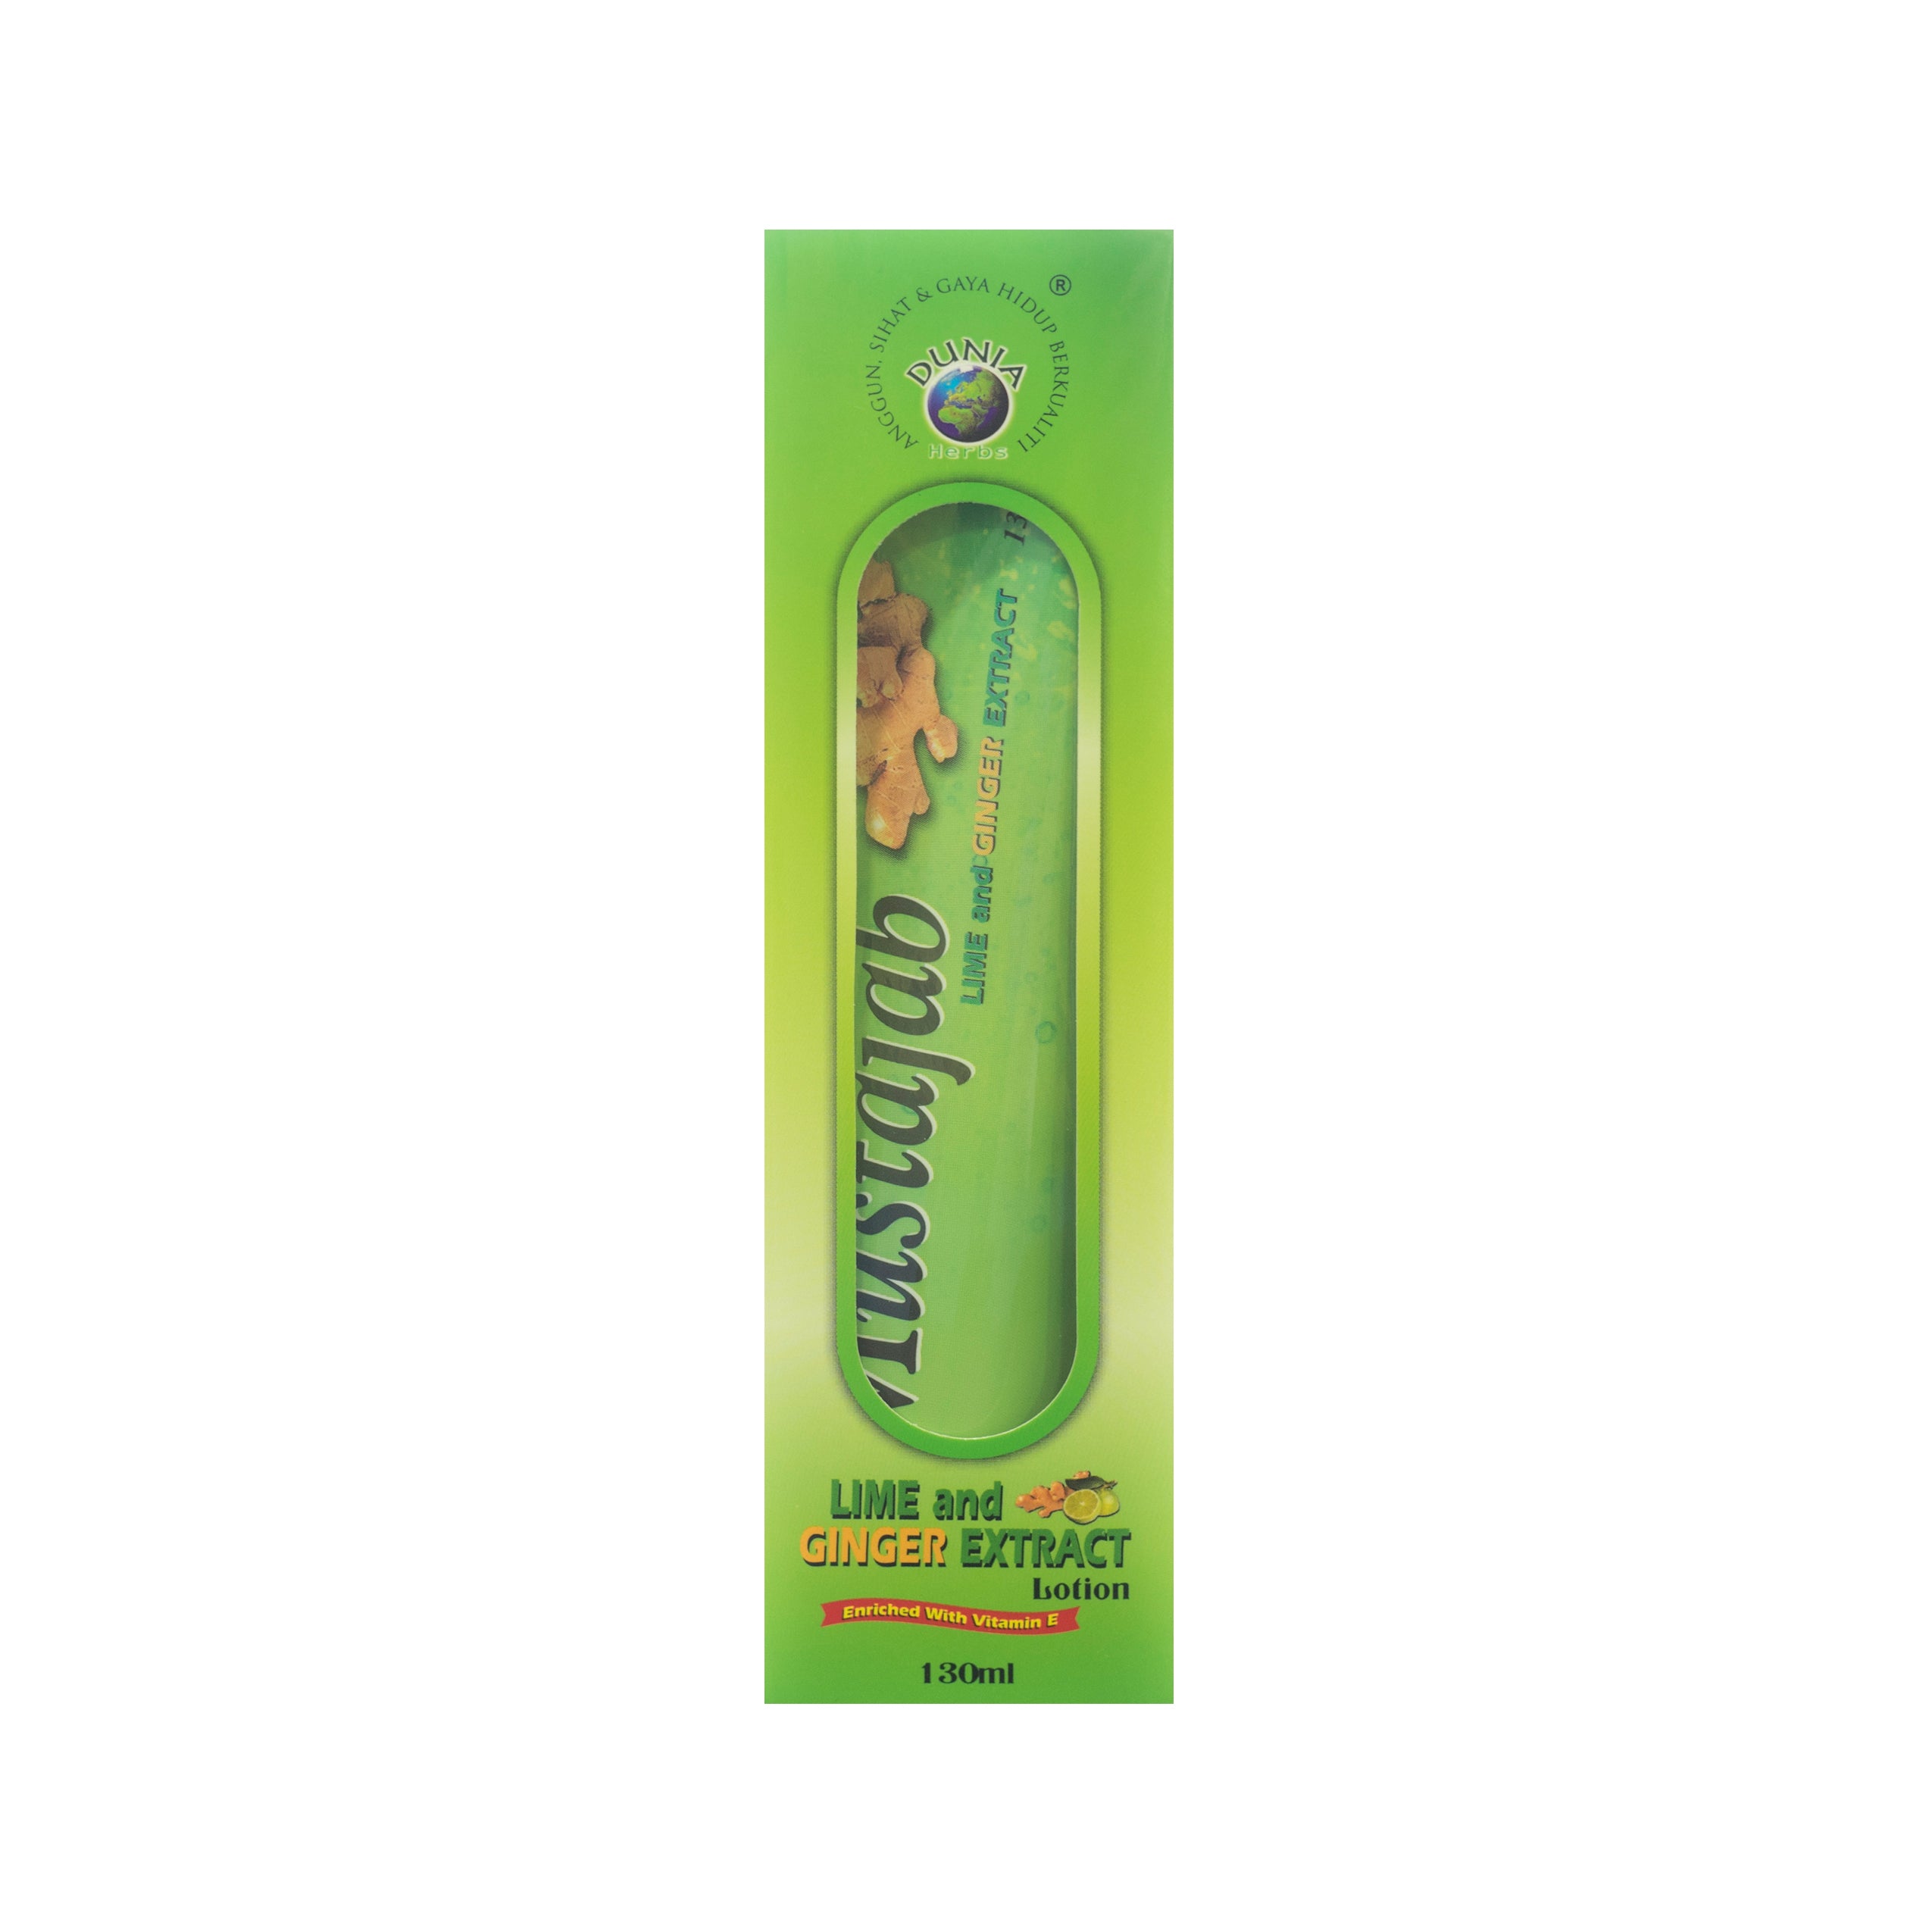 Dunia Herbs, Lotion Mustajab Lime and Ginger Extract, 130 ml